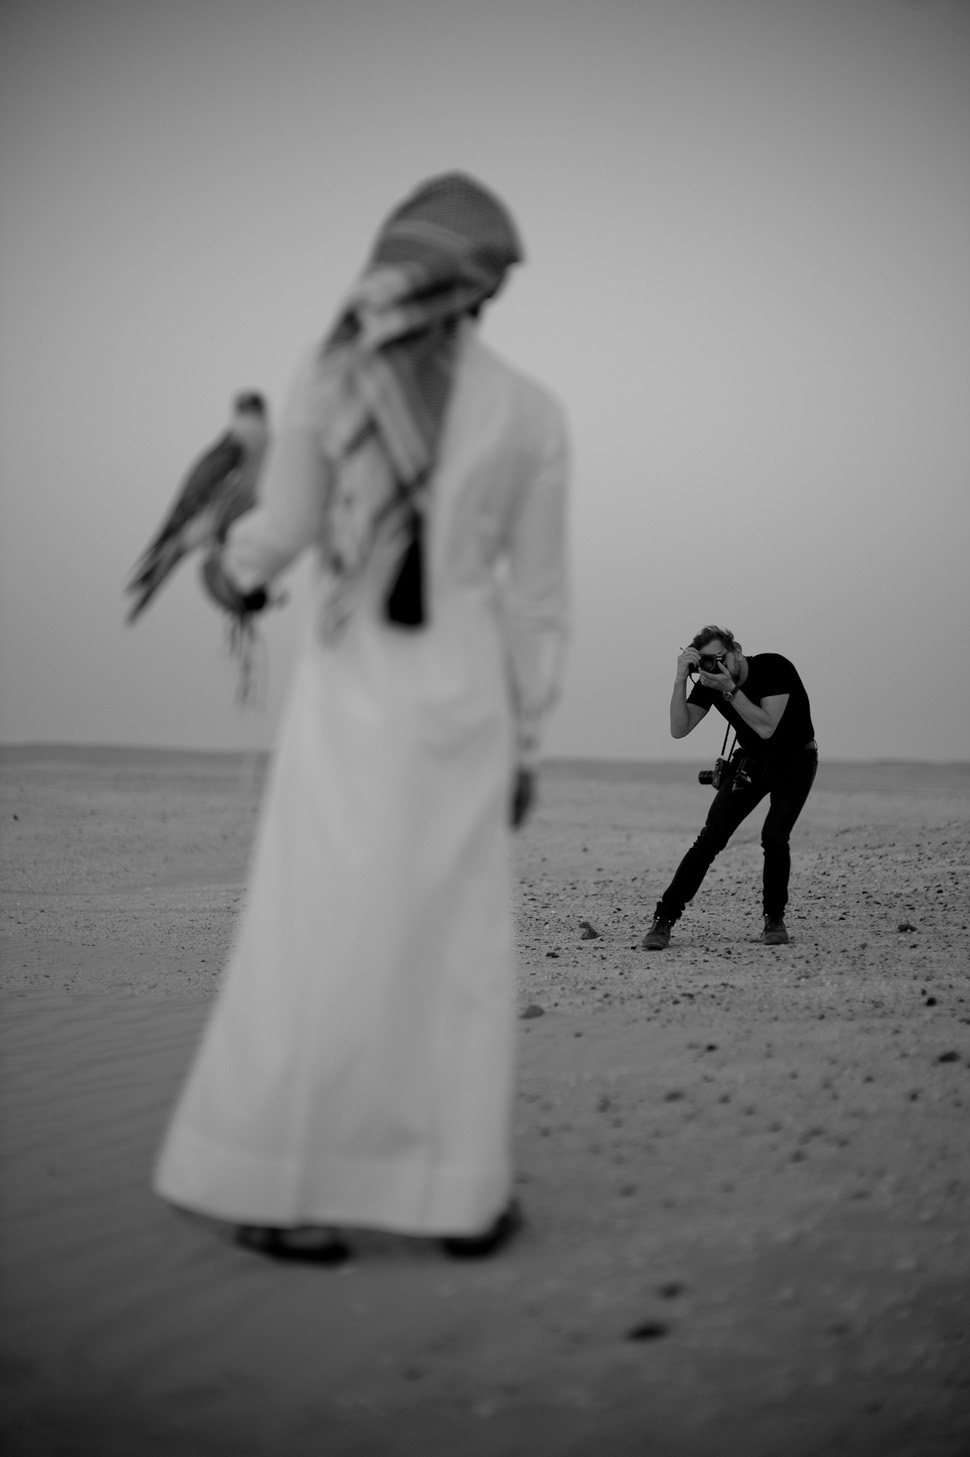 Thorsten Overgaard by Khalid Bin Hamad AL-Thani in the desert of Qatar. © 2013 Khalid Bin Hamad AL-Thani. All rights reserved. Leica M9 Hermes with Leica 50mm Noctilux-M ASPH f/0.95